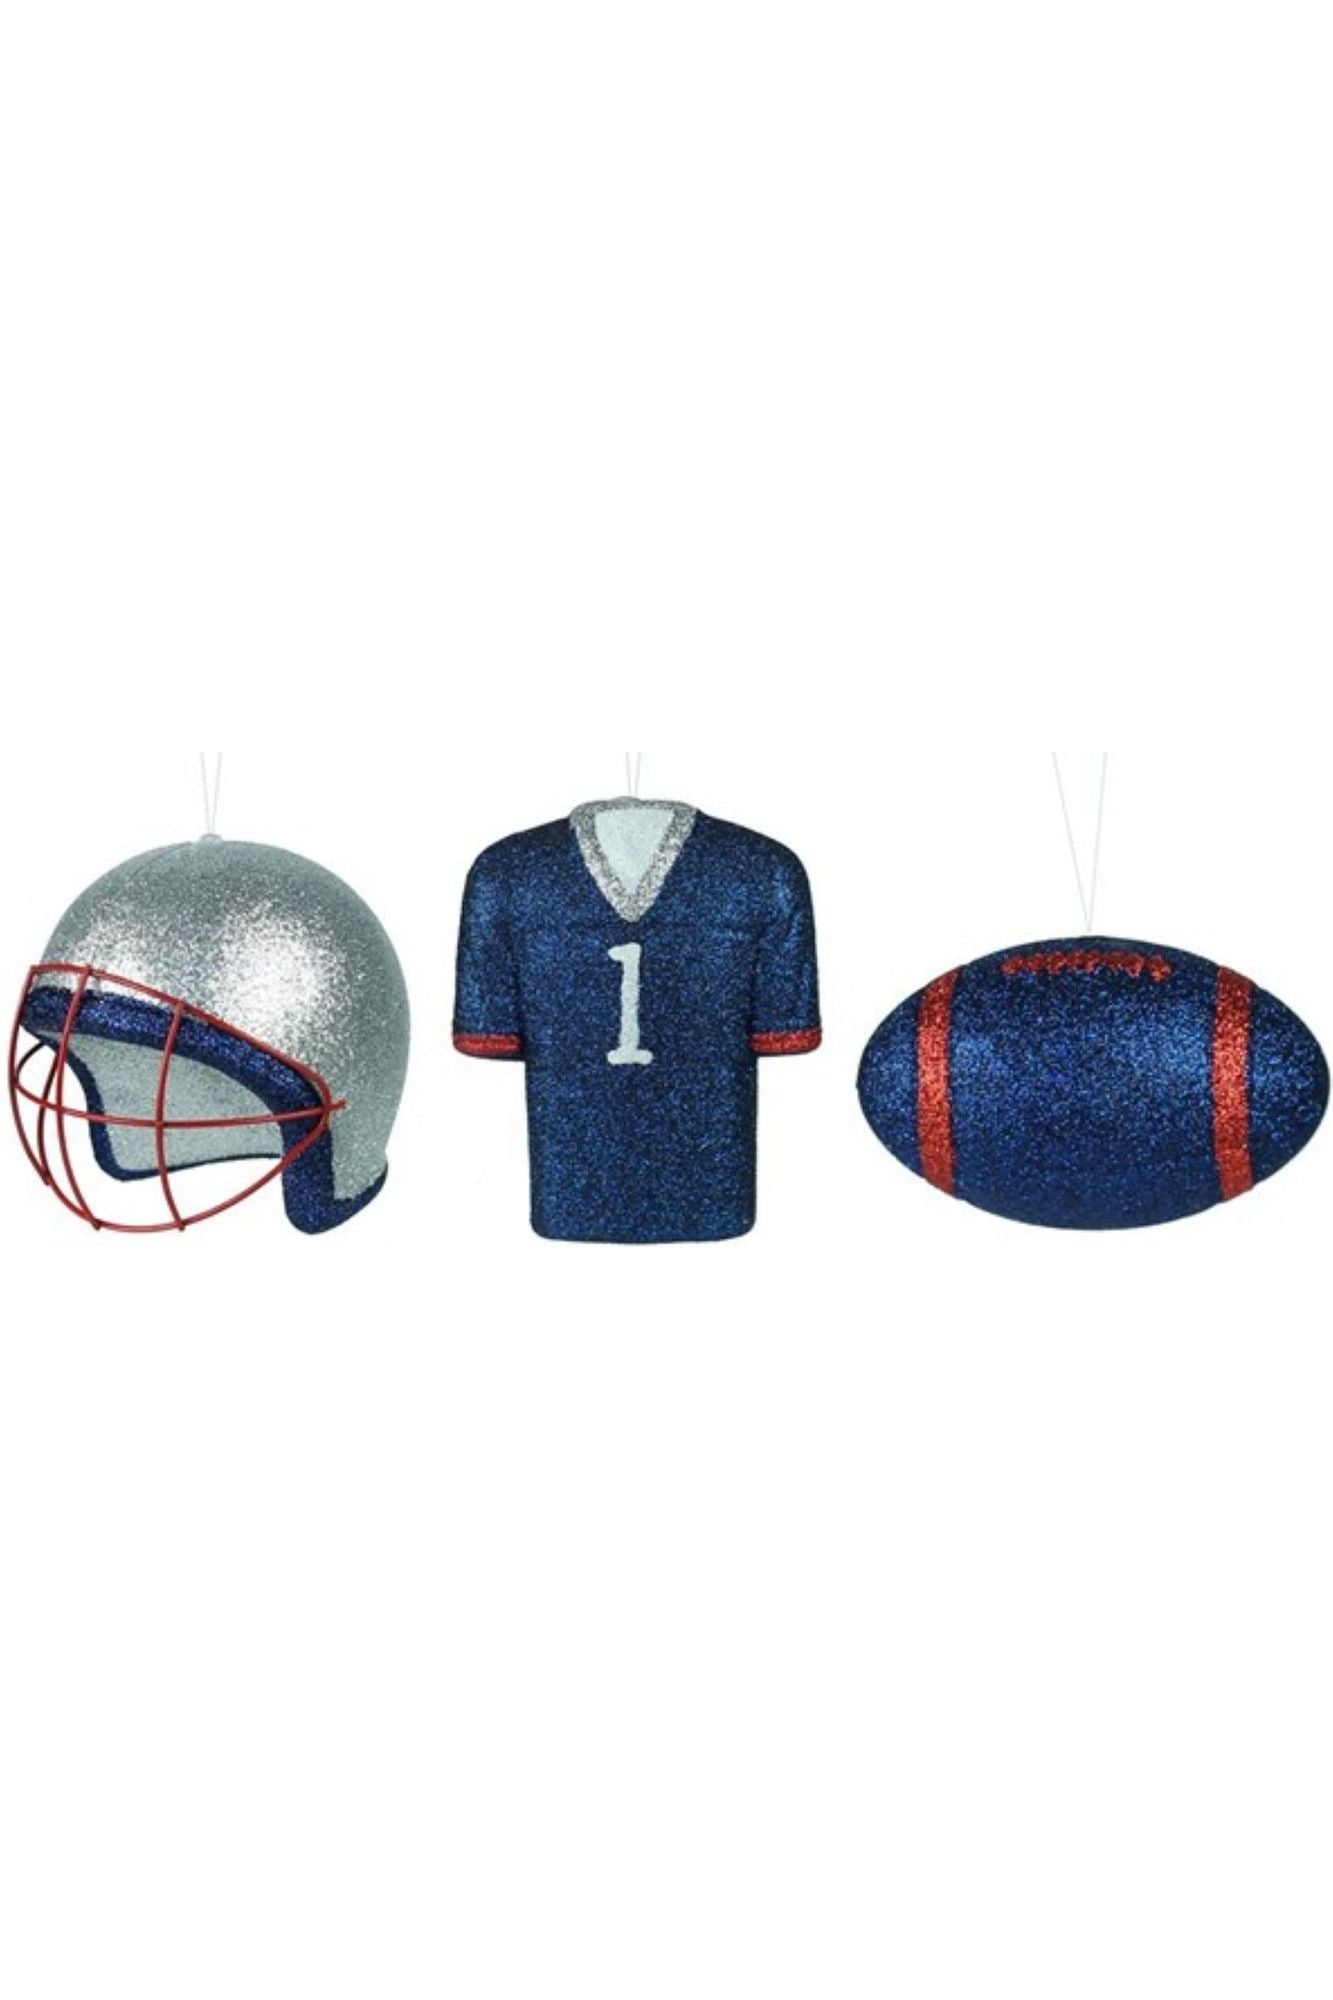 Shop For Glitter Football Ornament Assortment: Red, Blue & Silver (Set of 3) MS1300N7